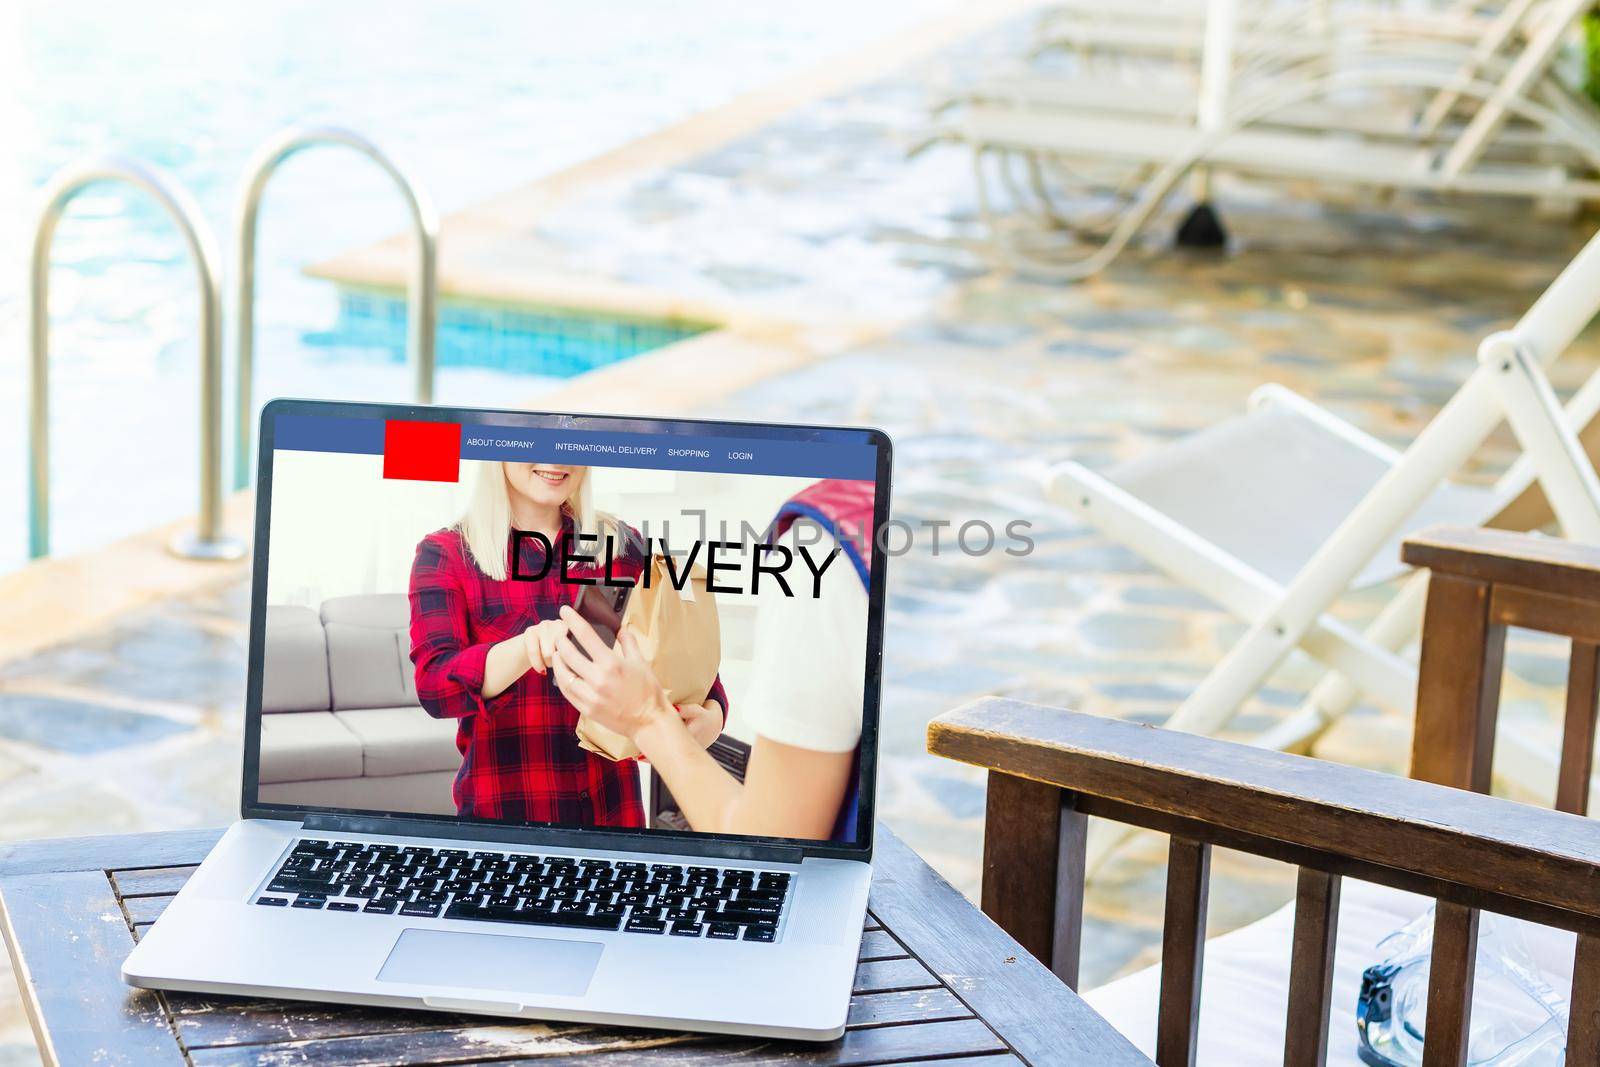 delivery icon on laptop keyboard. Online shopping, ecommerce and retail sale concept, delivery for customers ordering things from retailers websites using internet by Andelov13